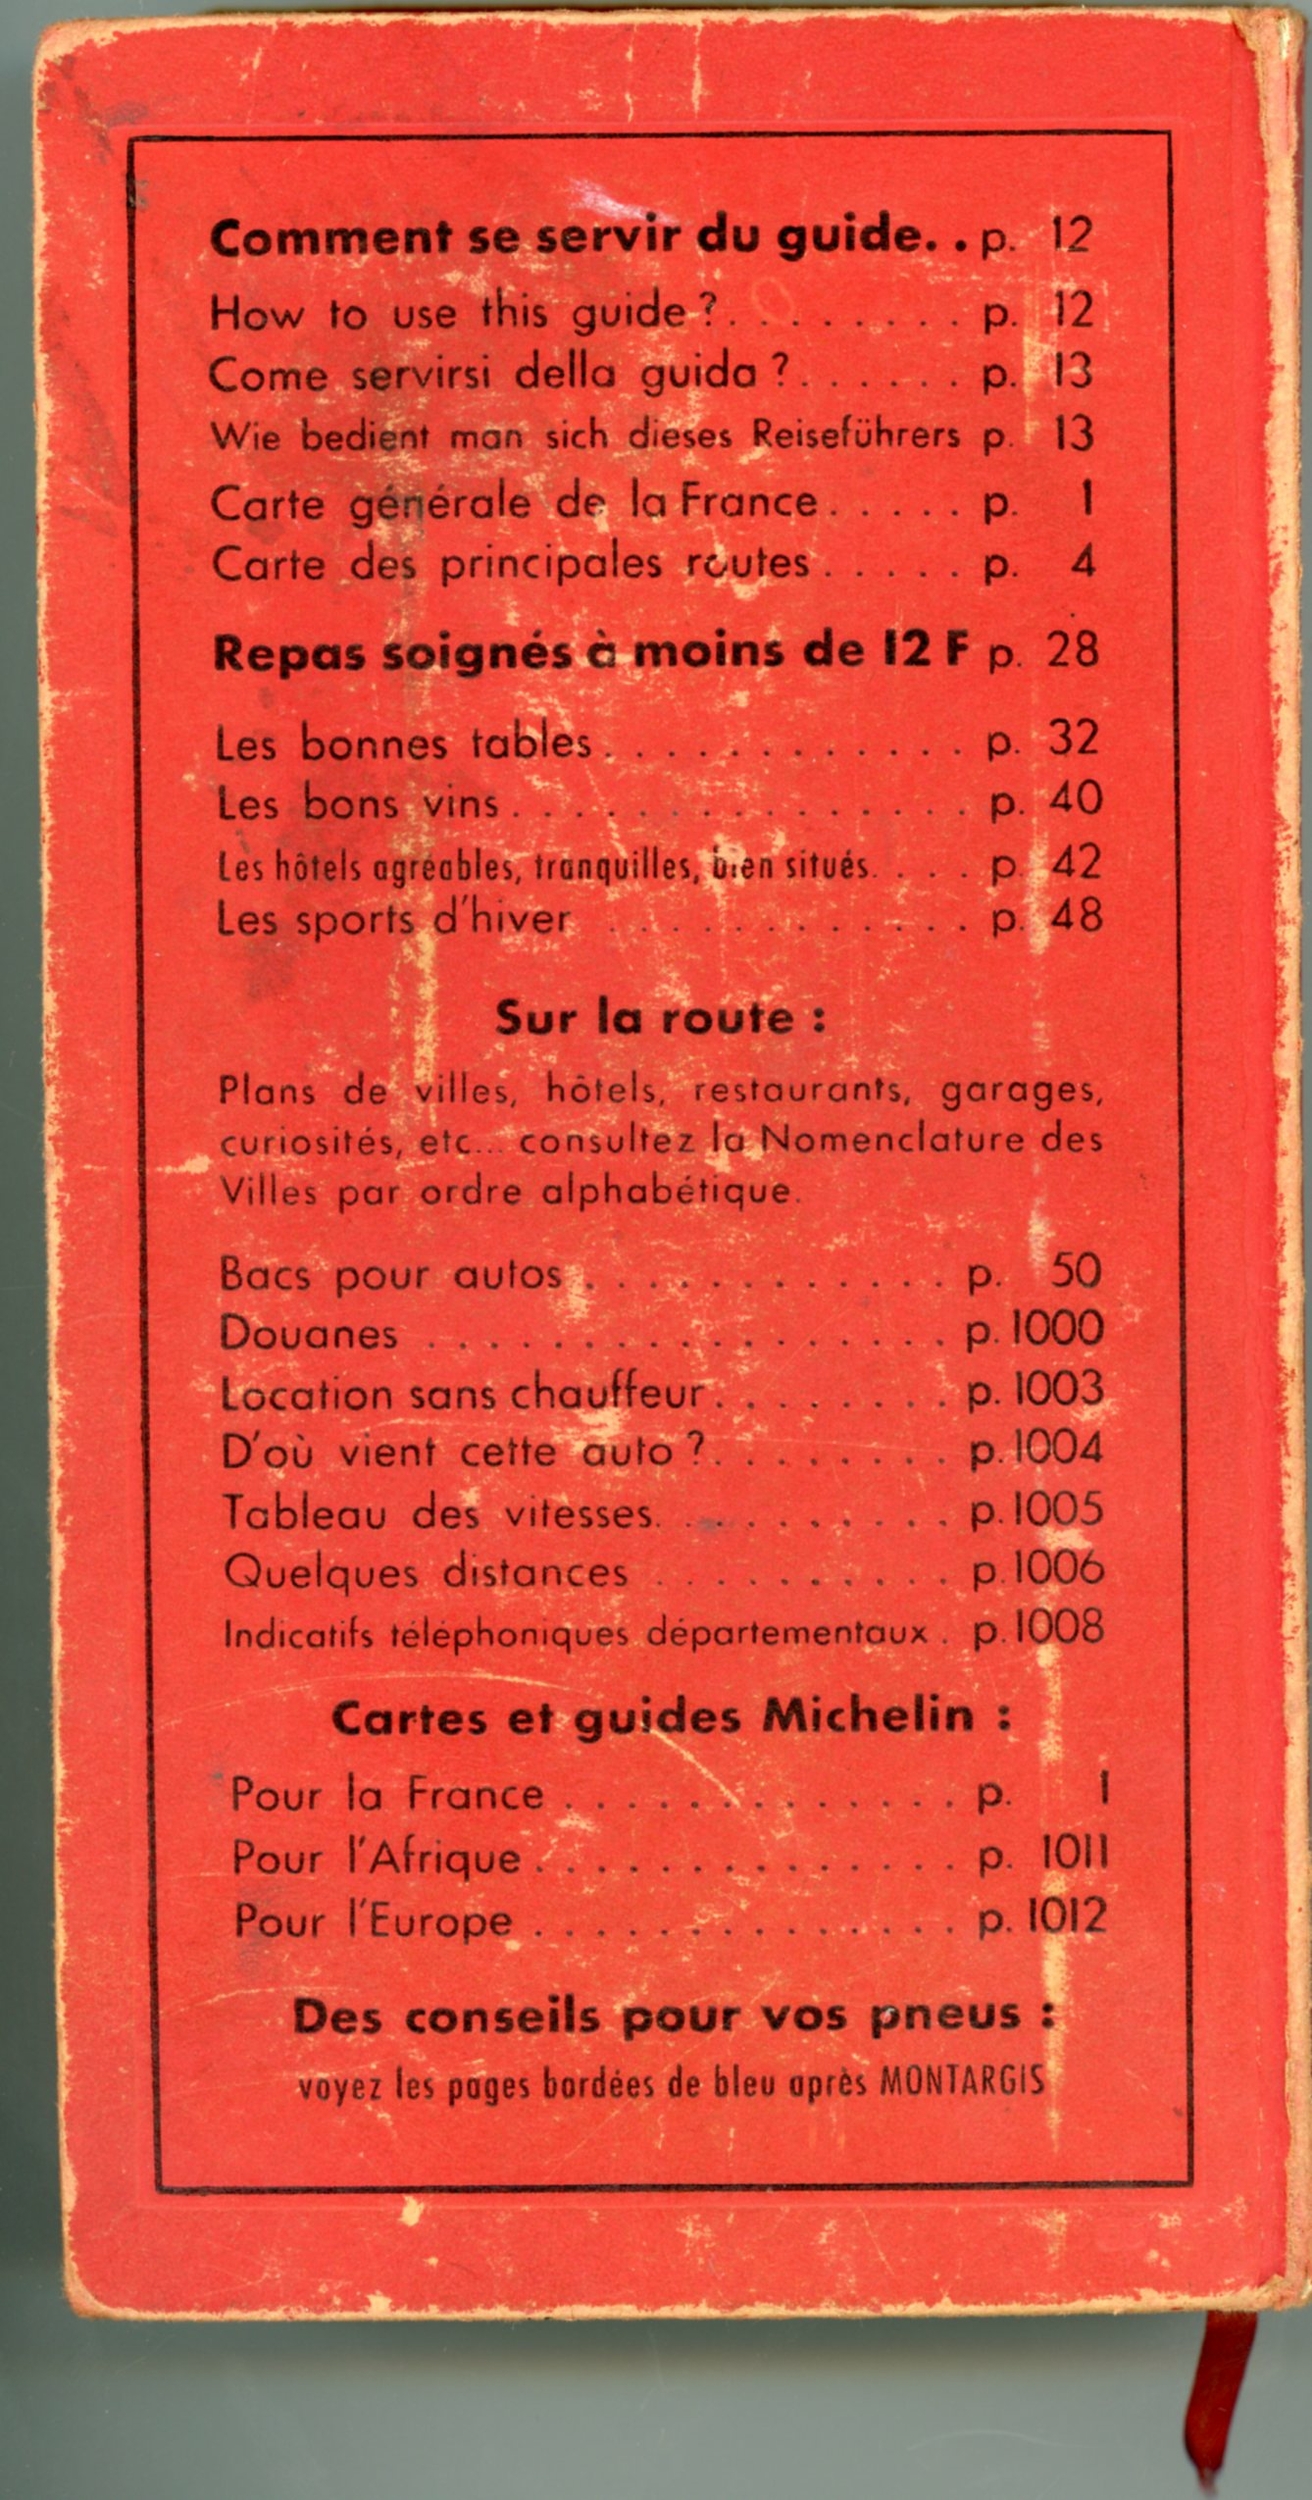 guide-michelin-restaurant-LEMASTERBROCKERS-GUIDE-ROUGE-MICHELIN-1965